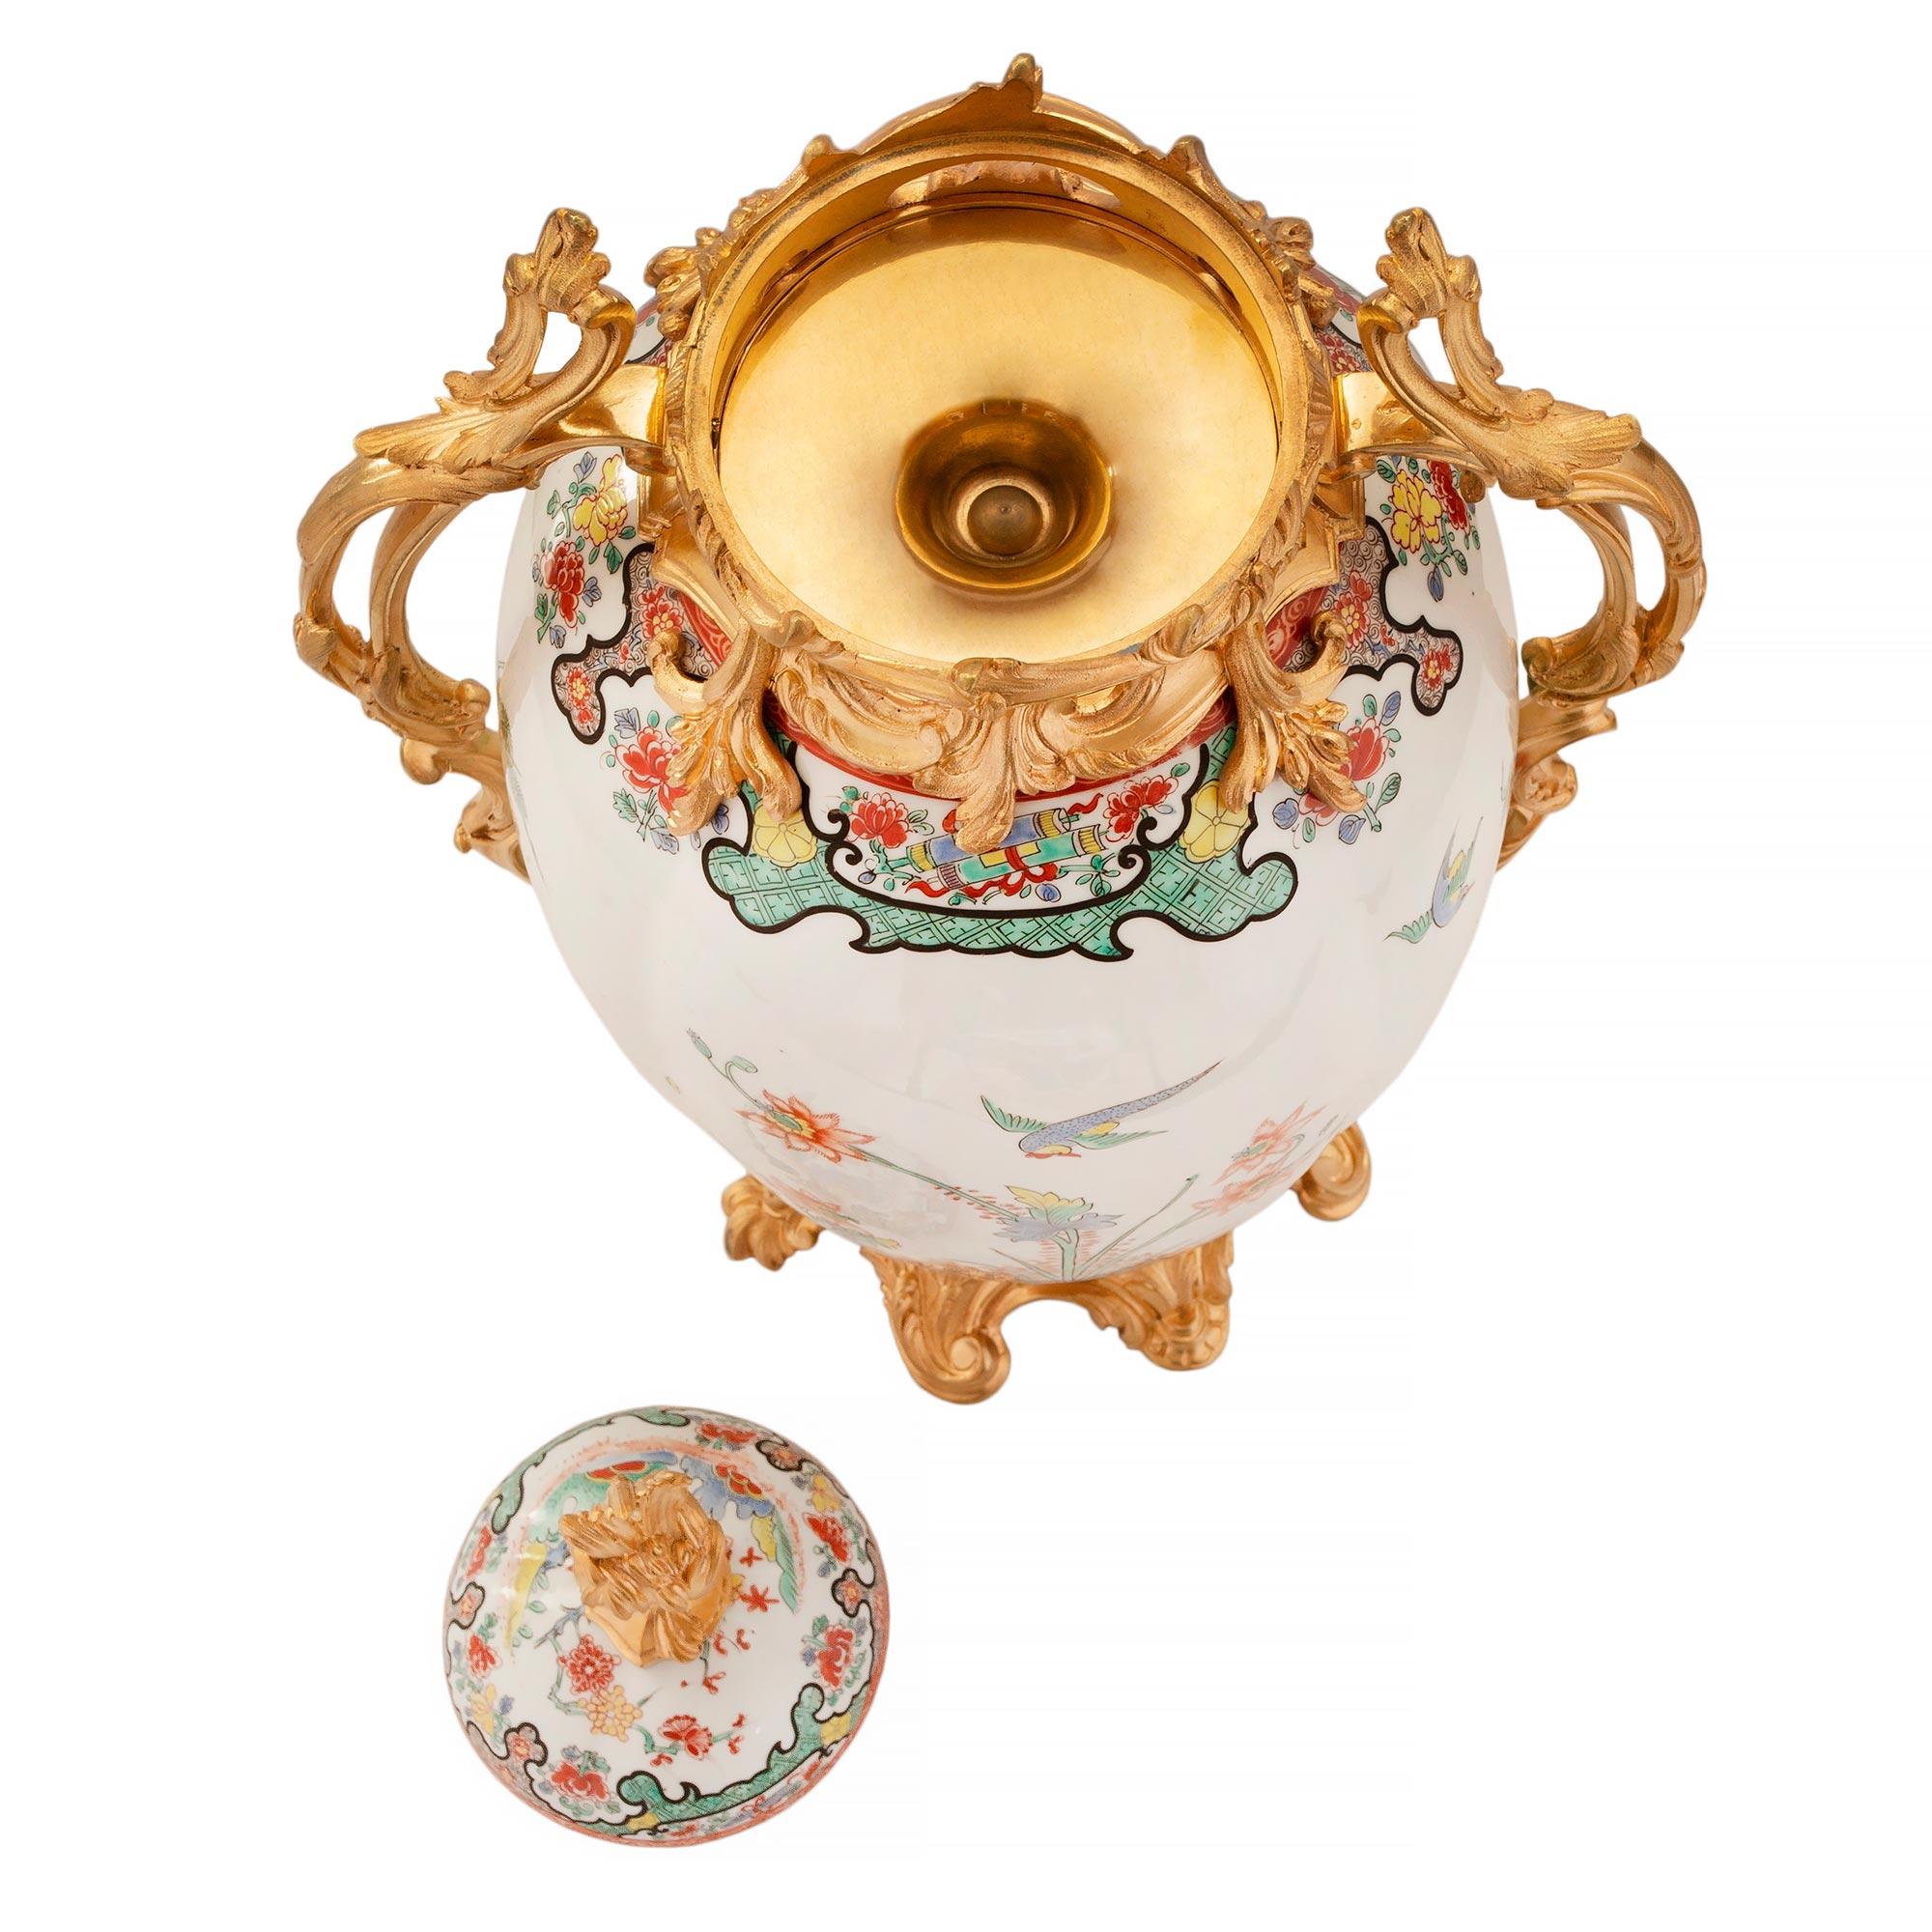 A sensational and large scaled pair of French 19th century Louis XV st. Samson porcelain and ormolu mounted lidded urns. The pair are raised by a scalloped ormolu base with designs of acanthus leaves. The circular oblong vase above has most elegant